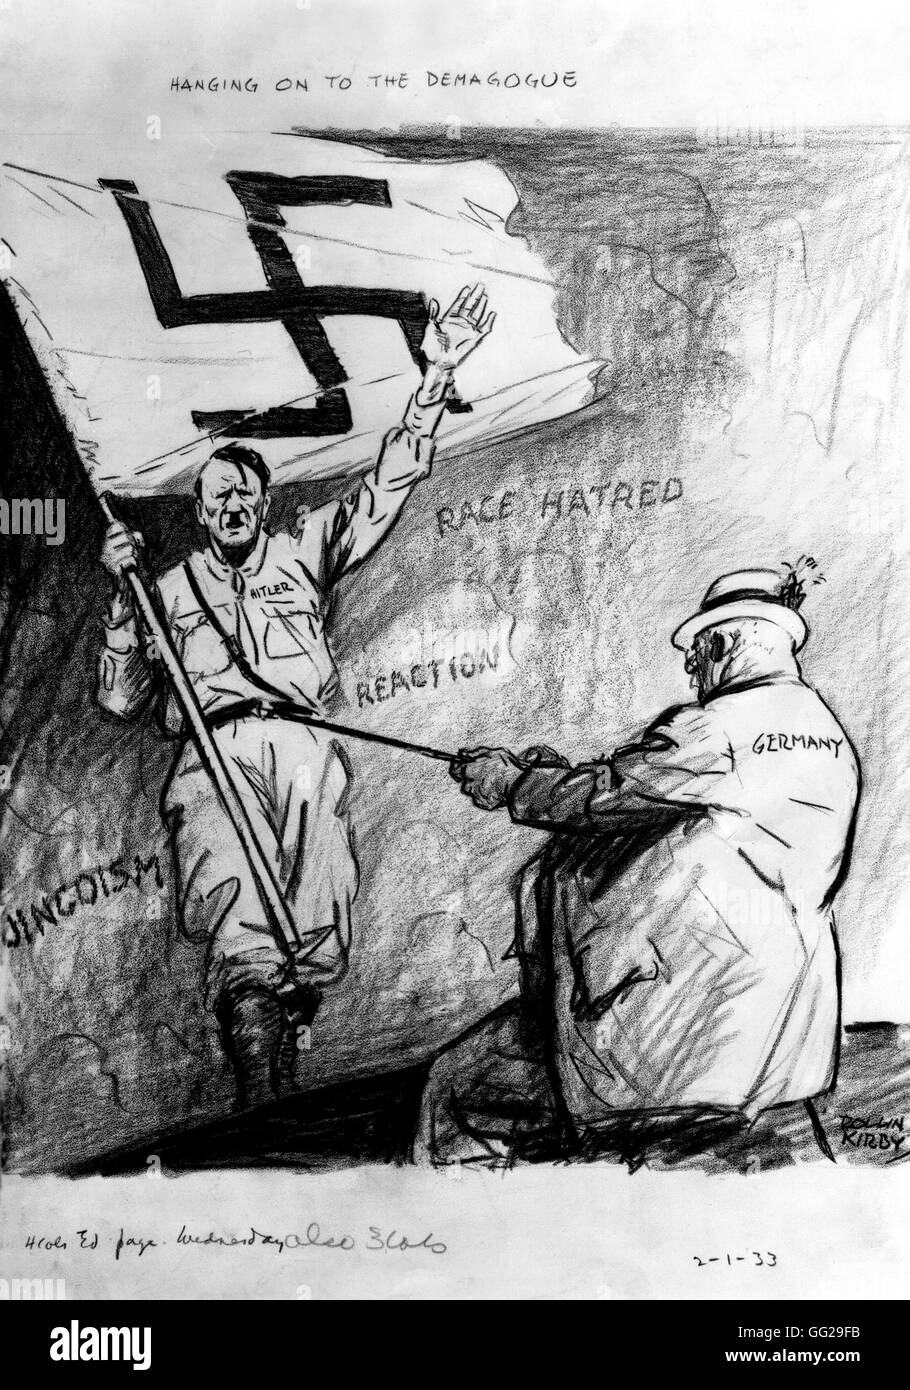 Satirical cartoon by Kirby: Conservative Germany wants to attract demagogue Hitler 1933 Germany Washington. Library of congress Stock Photo